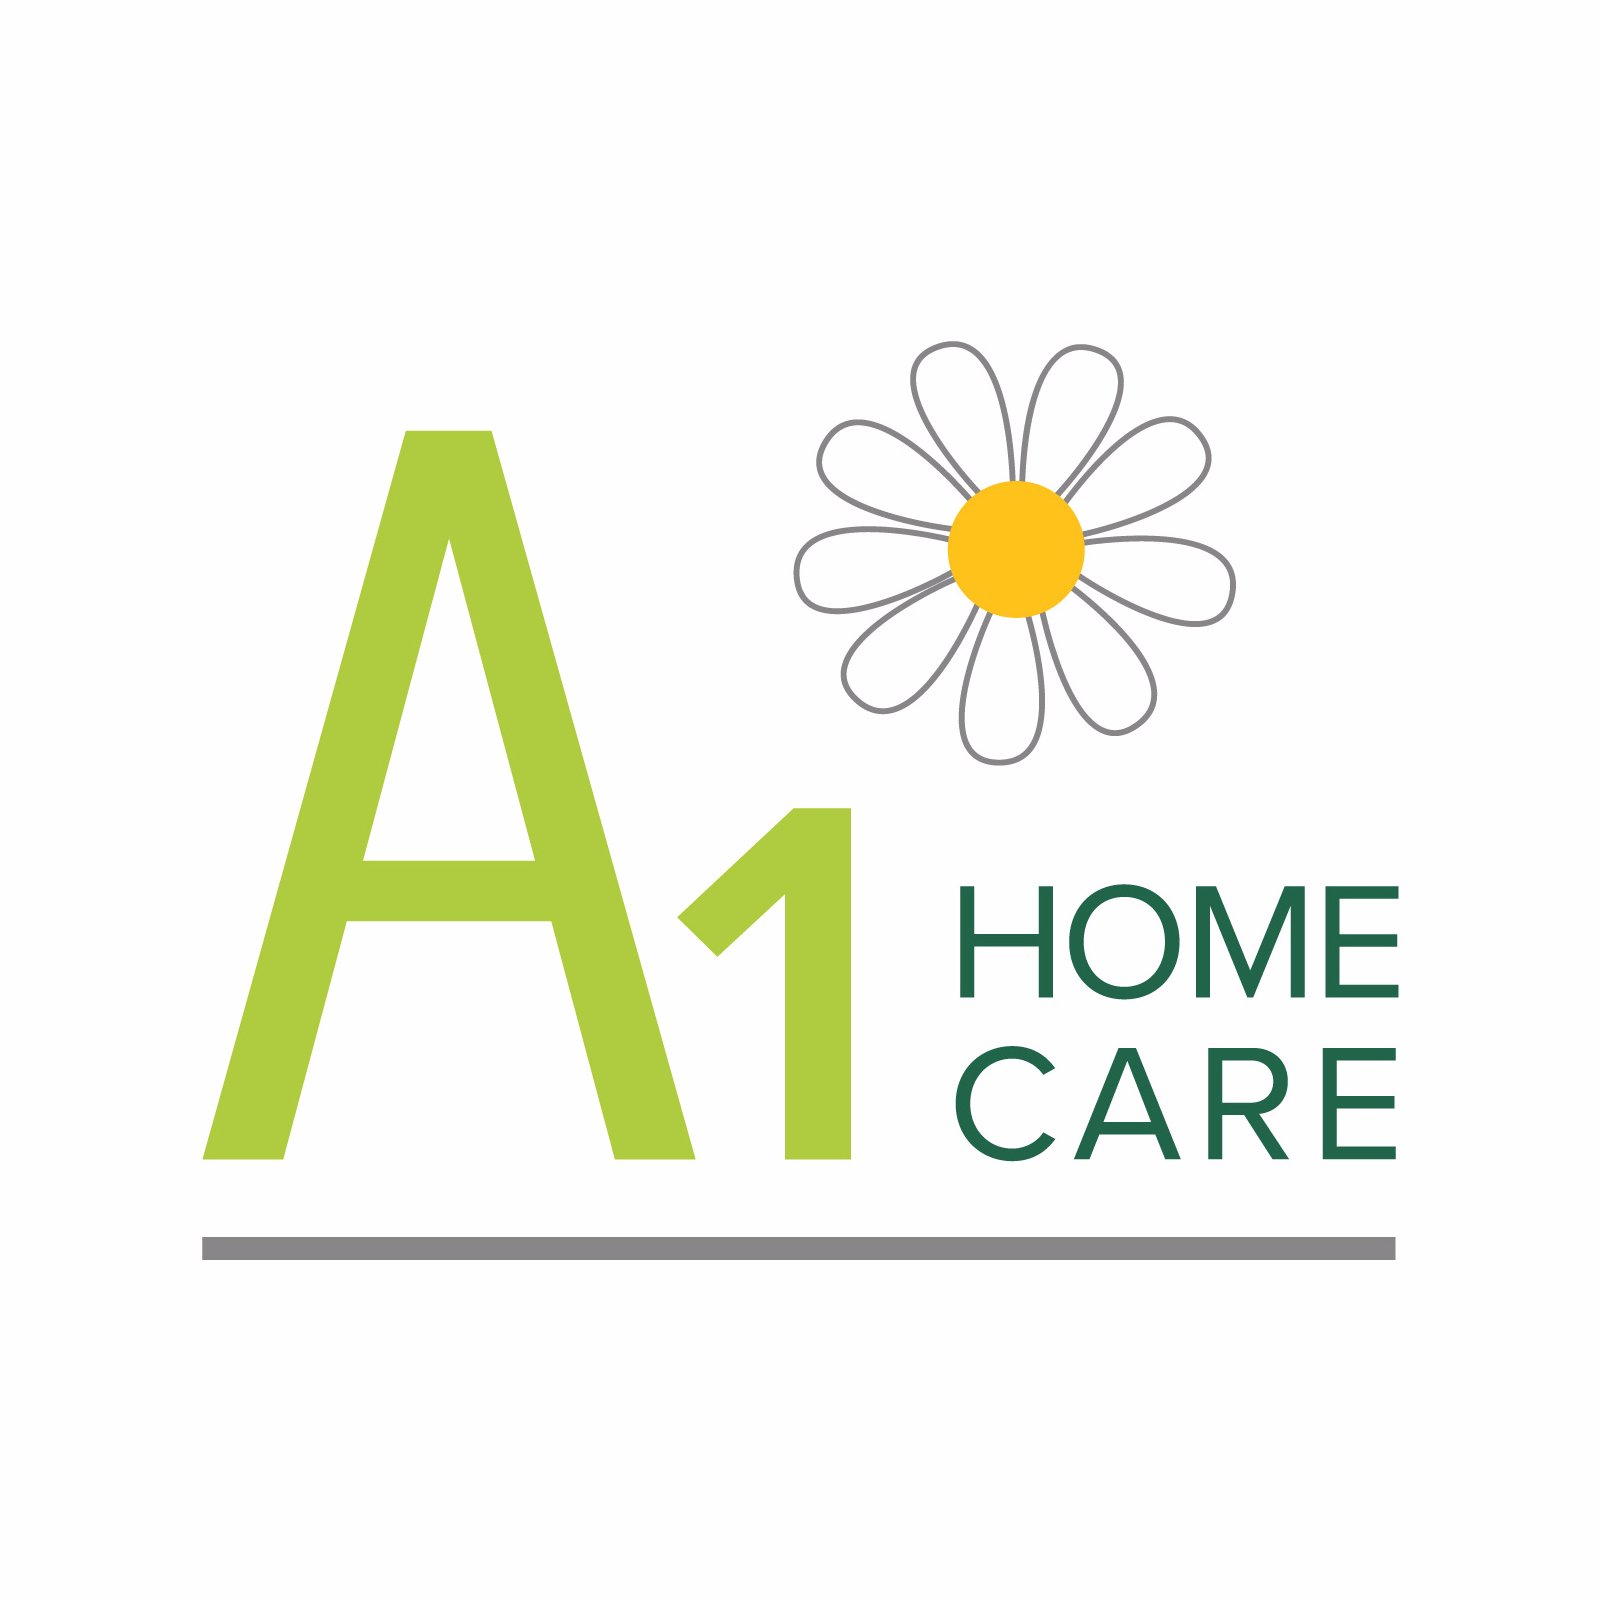 A1 Home Care LTD are committed to providing quality care to individuals in their own homes.